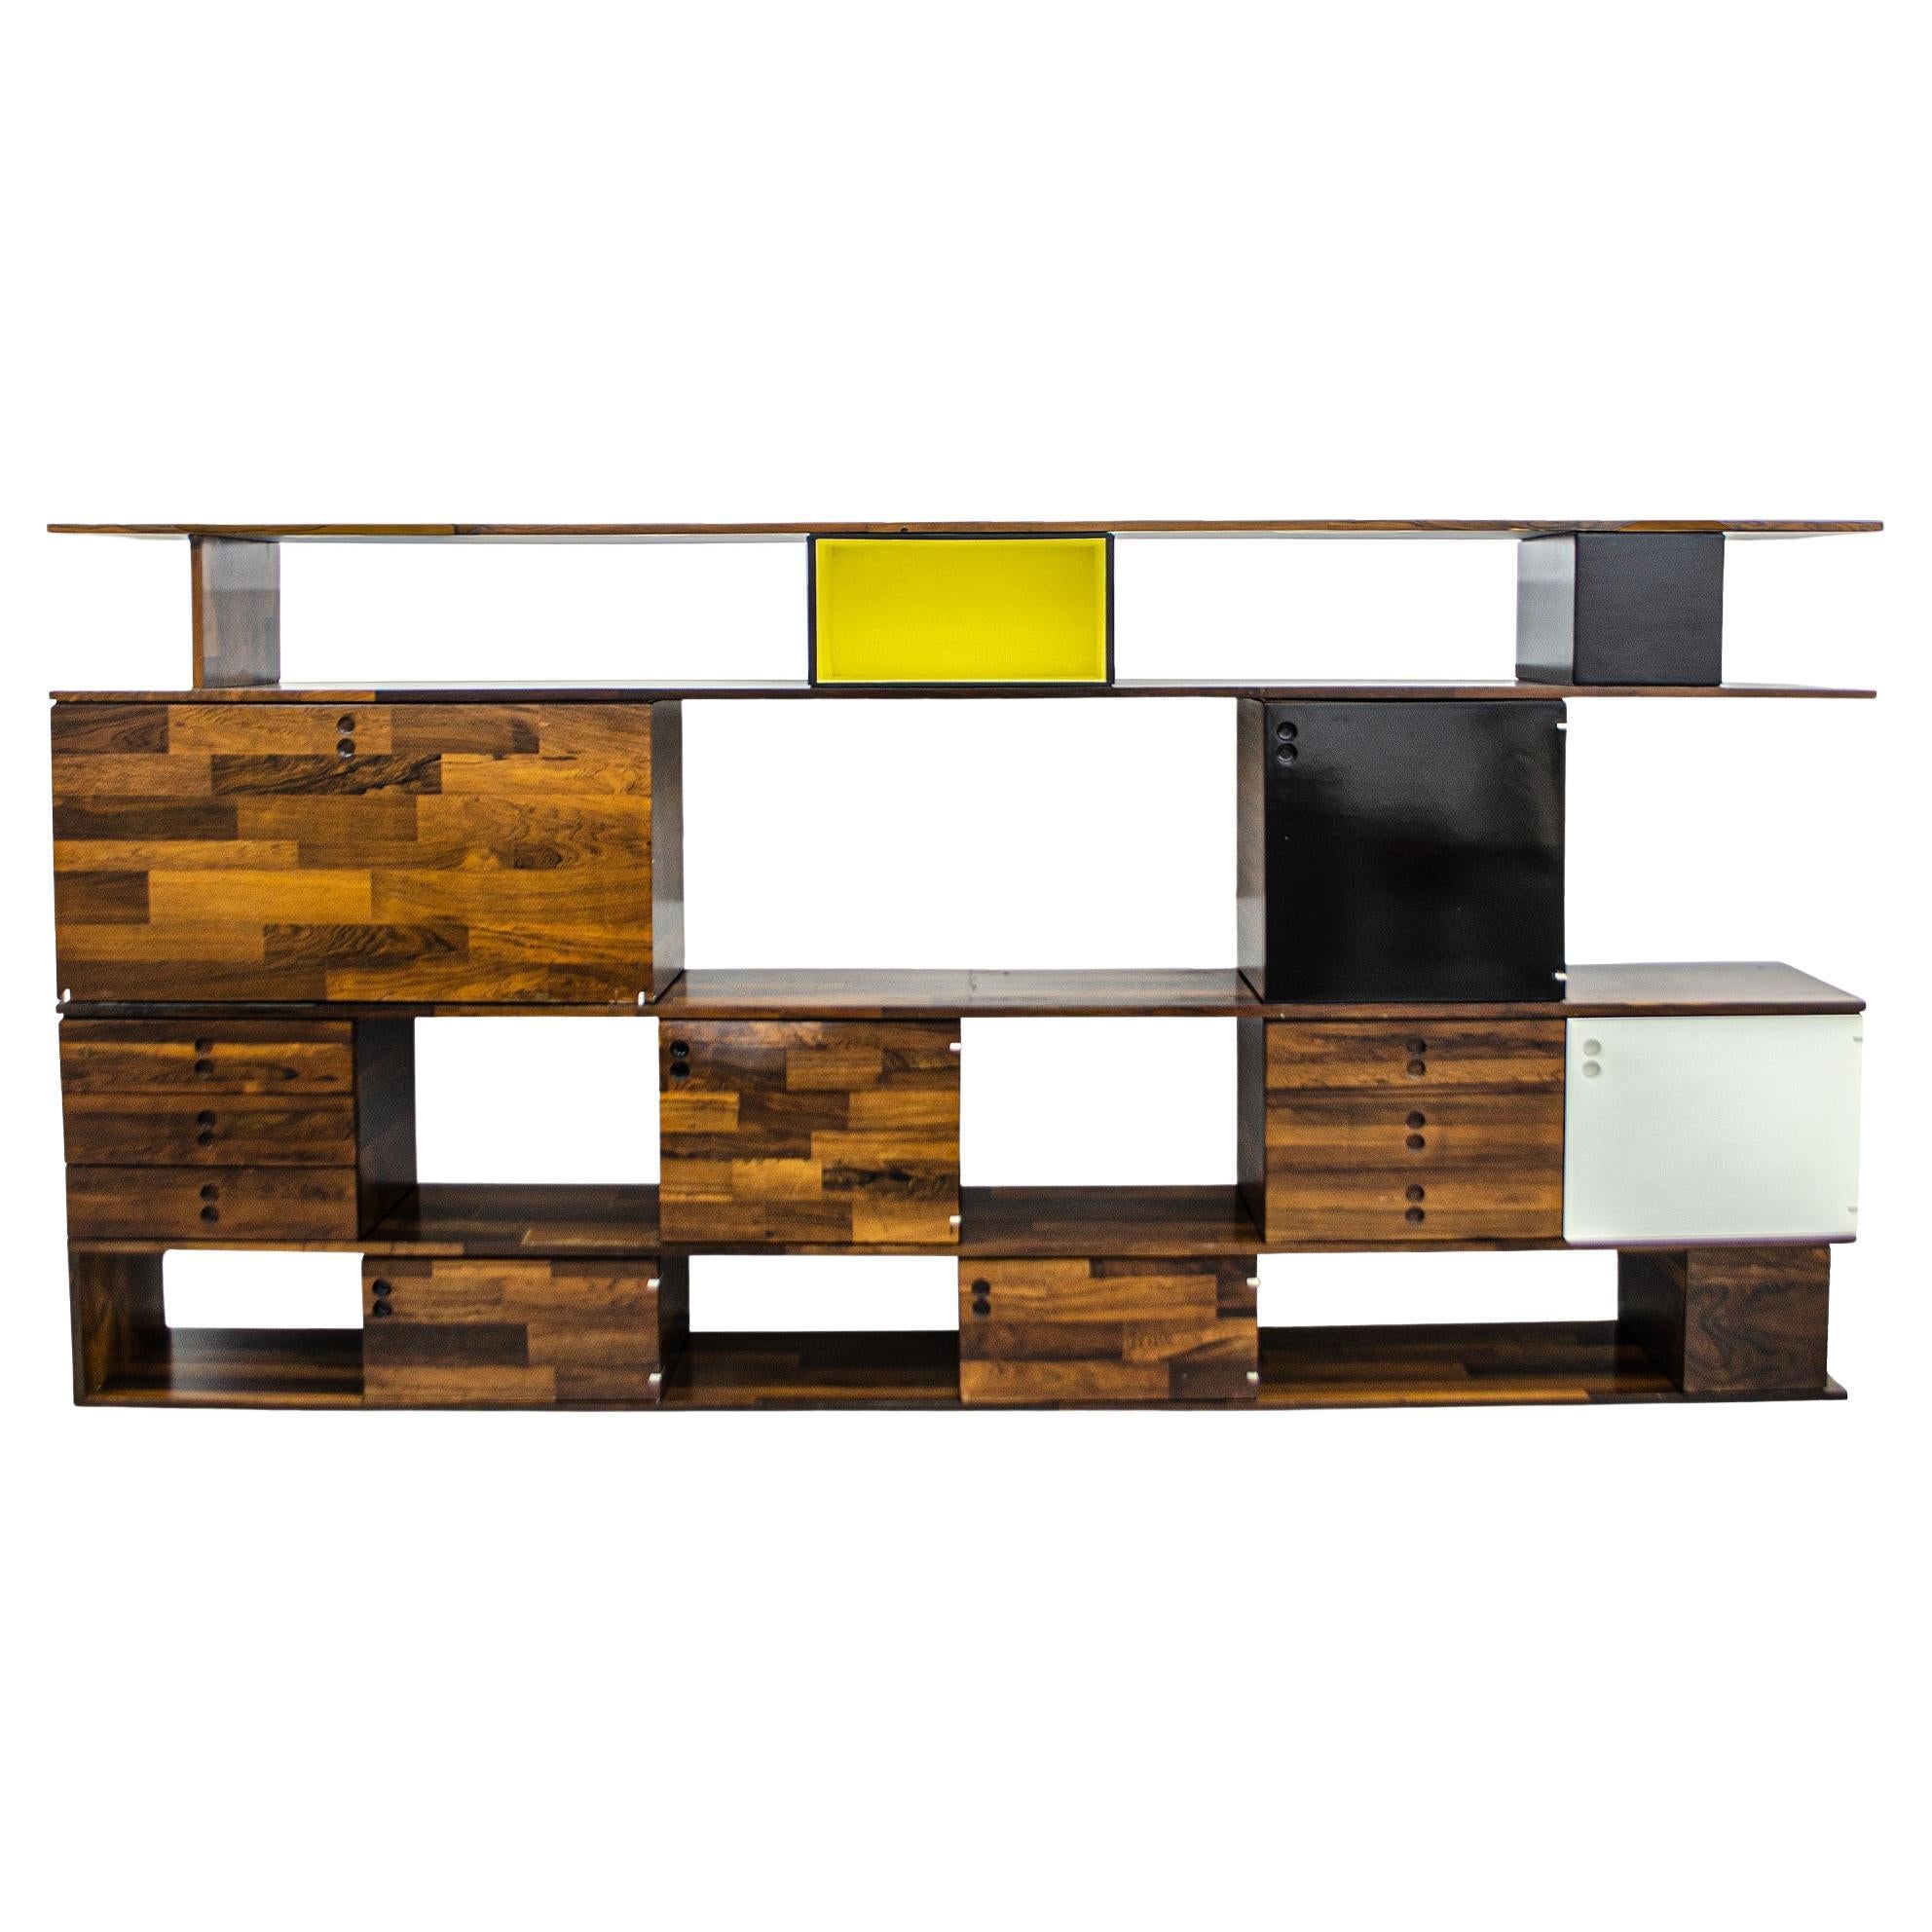 Definitely a statement piece, this fantastic “Kovacs” modular shelving was designed in the ’60s by the Brazilian master Jorge Zalszupin. 
Super versatile, the design itself allows the creation of different types of compositions, shapes, and looks.